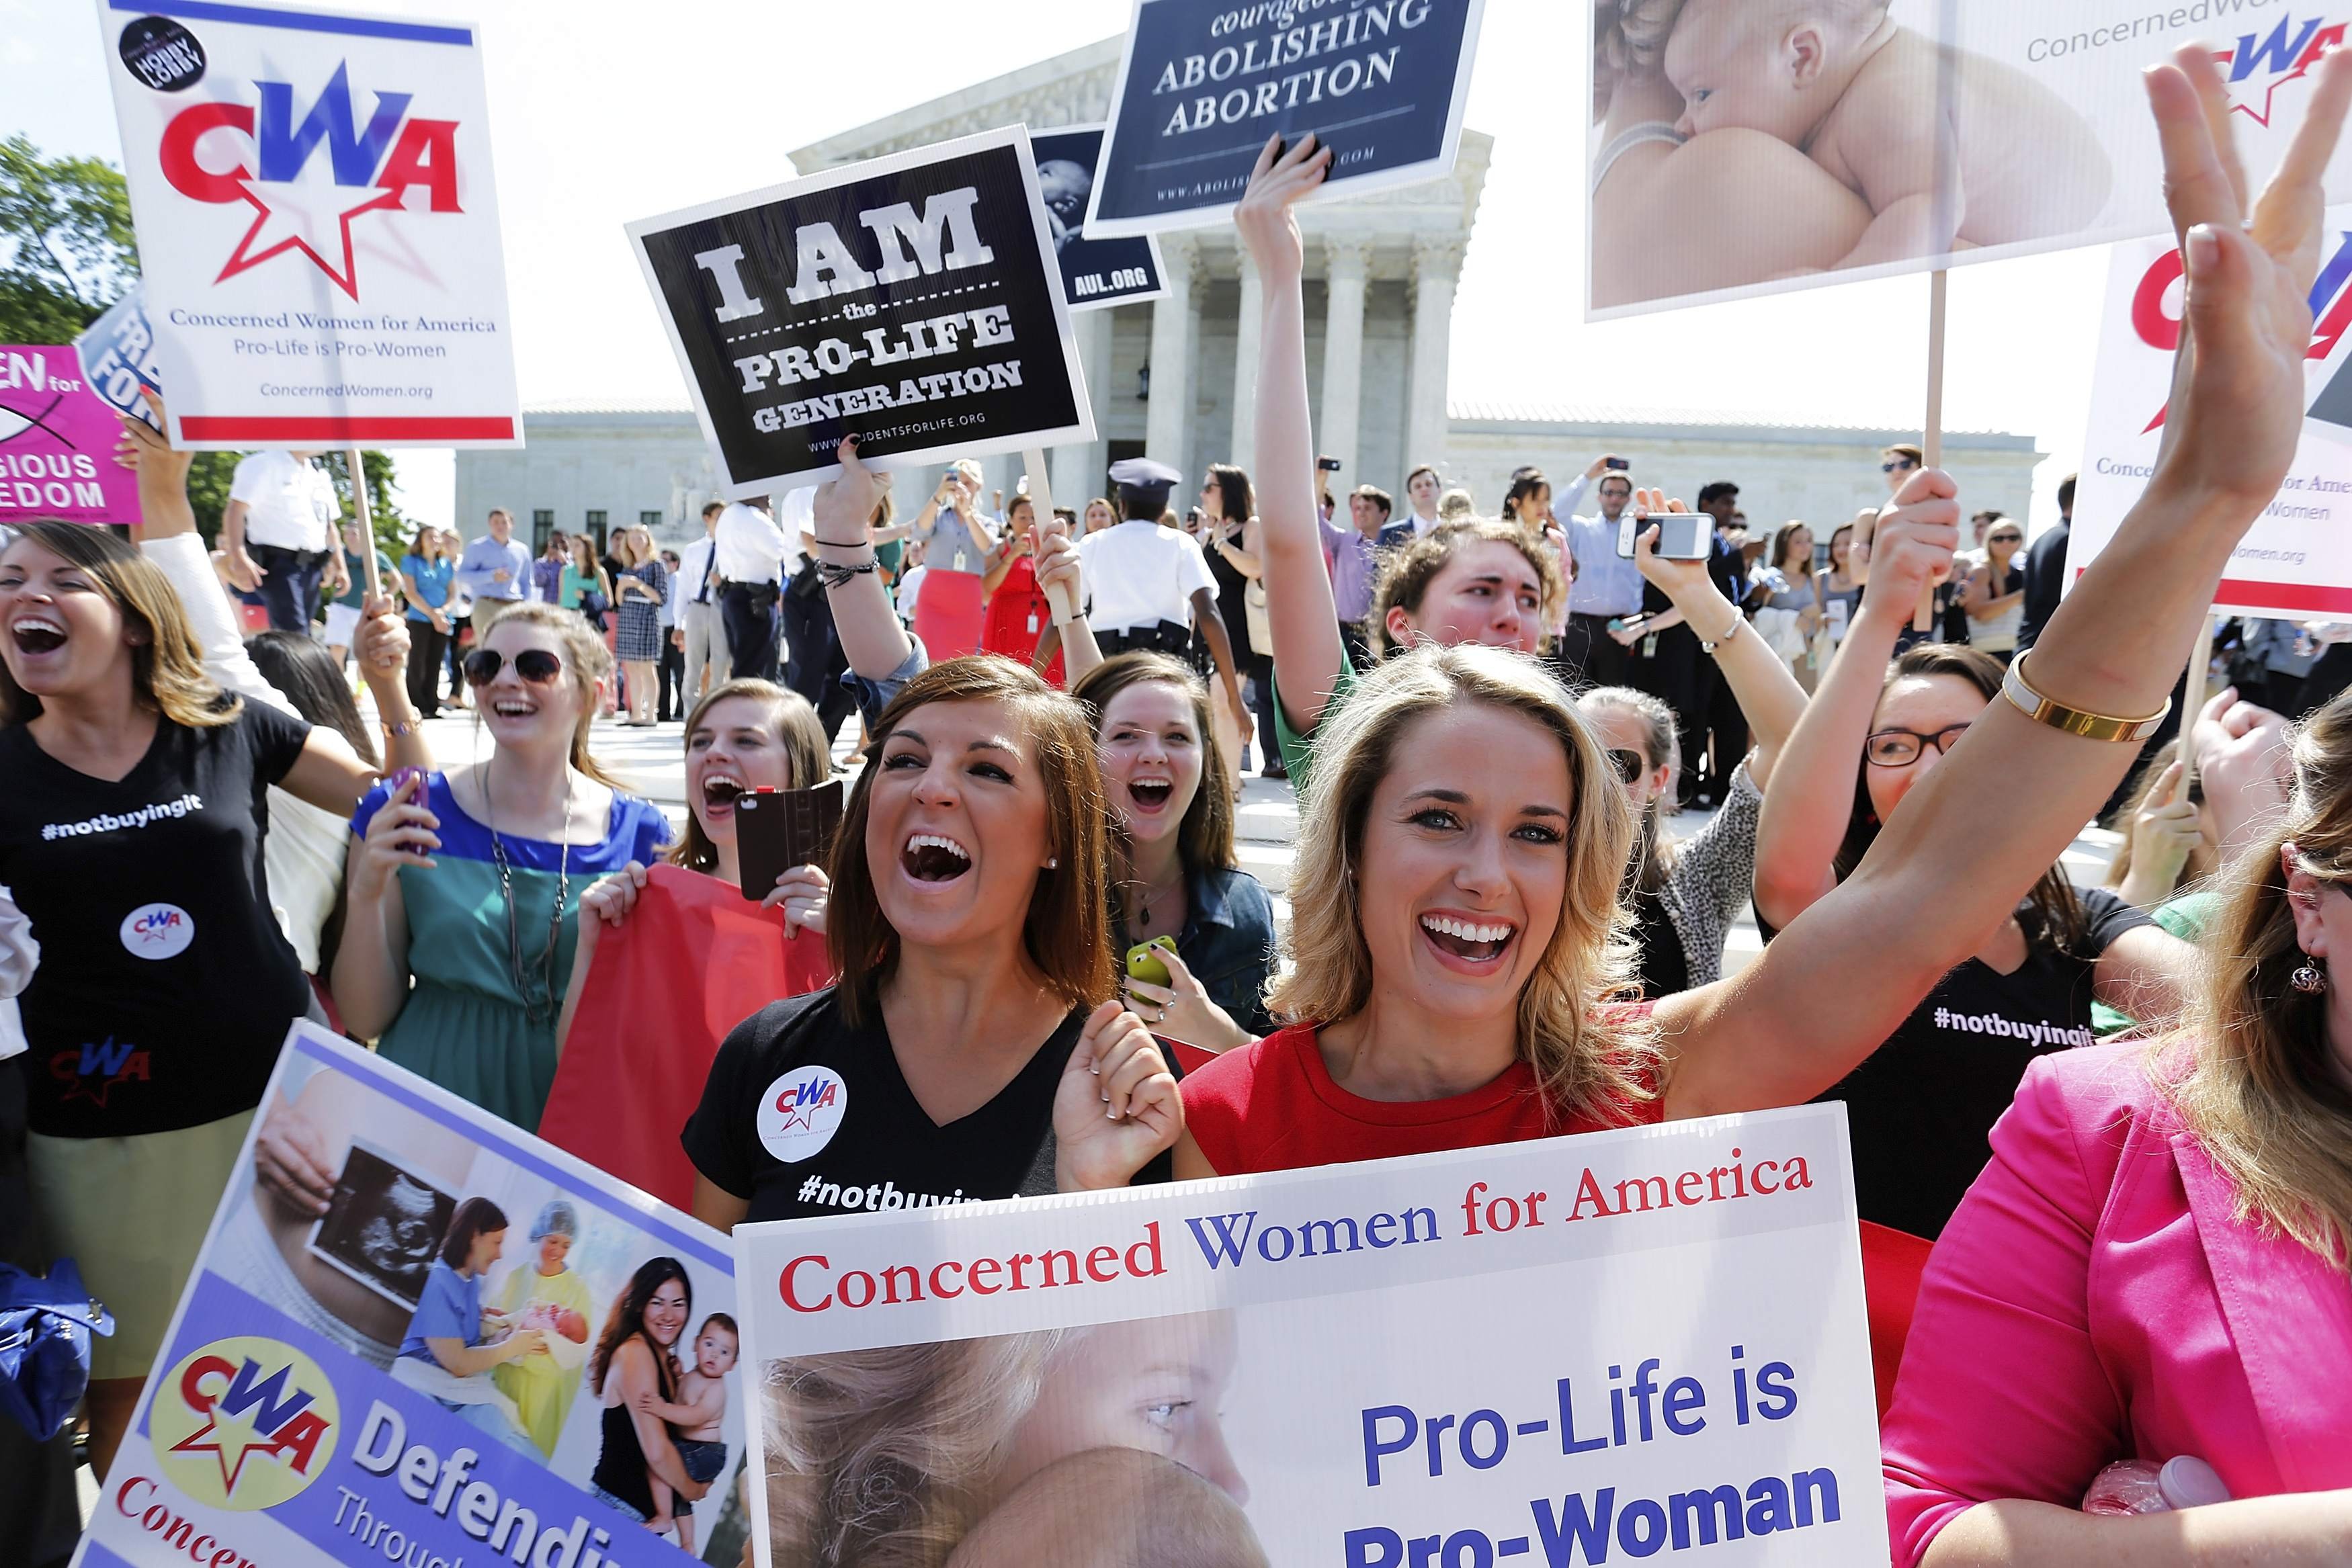 Anti-abortion demonstrators cheer as the ruling for Hobby Lobby was announced outside the U.S. Supreme Court in Washington on June 30, 2014. (Jonathan Ernst—Reuters)